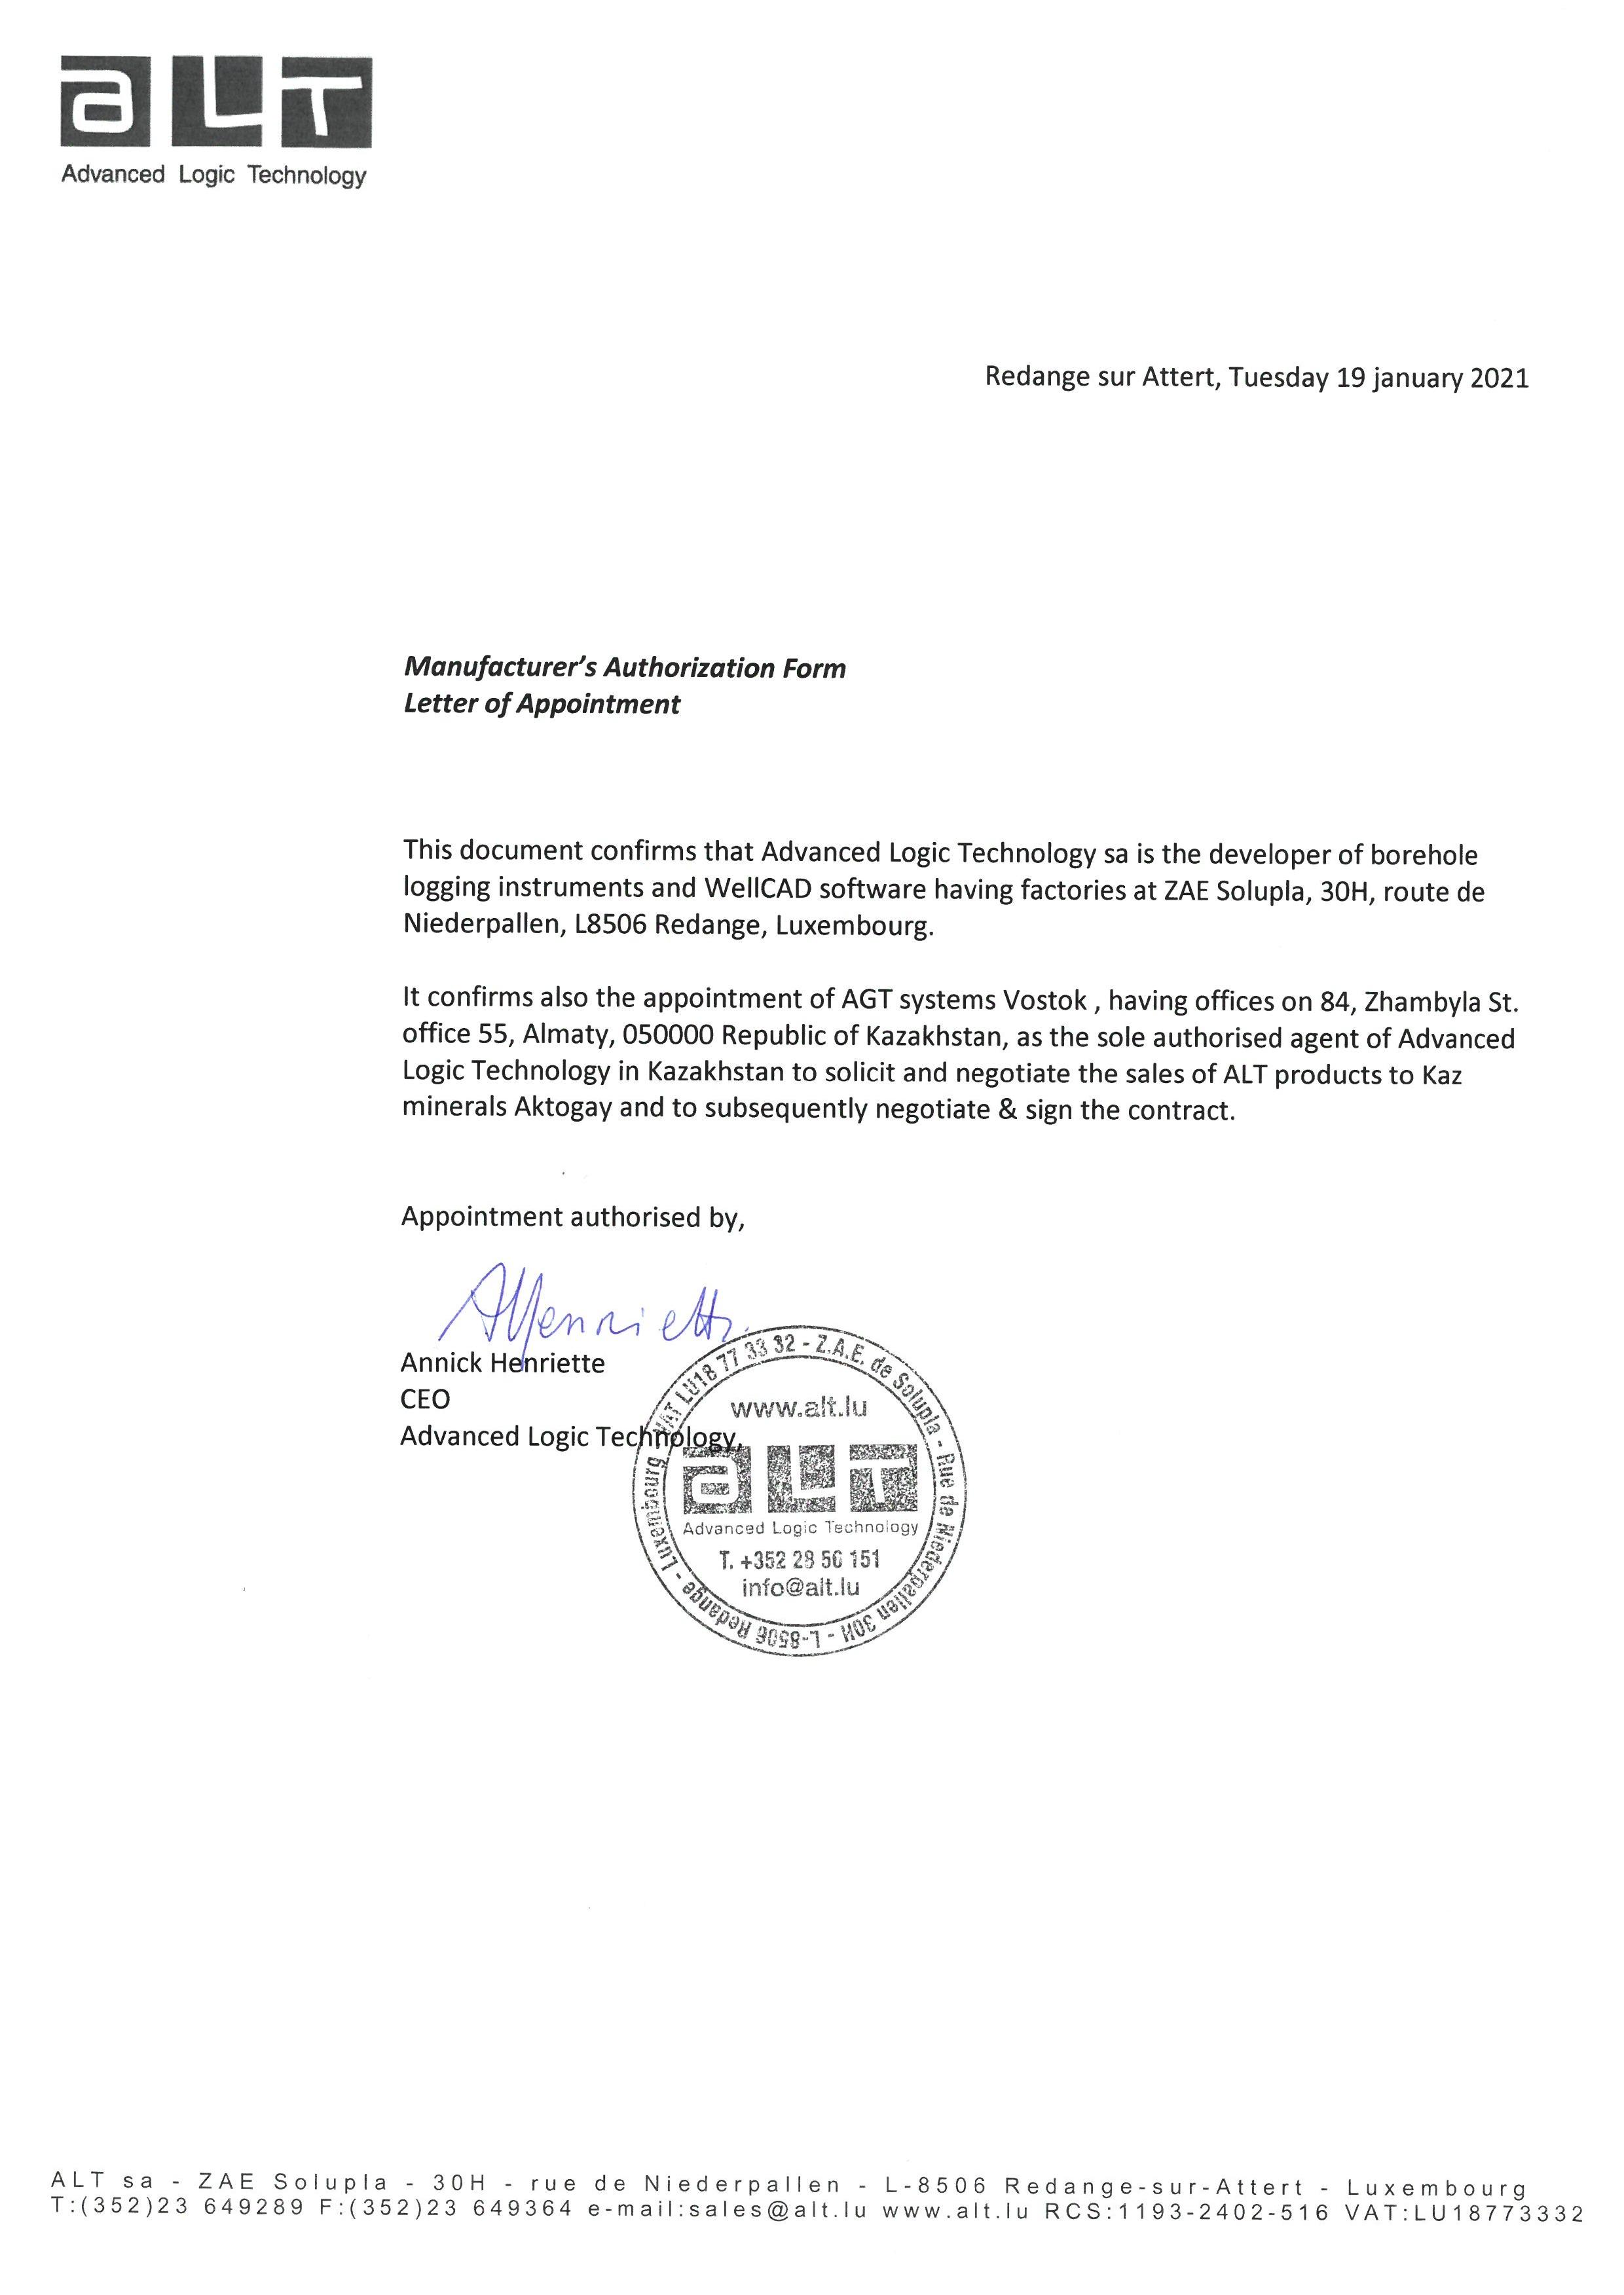 Letter of Authorization with ALT 2021